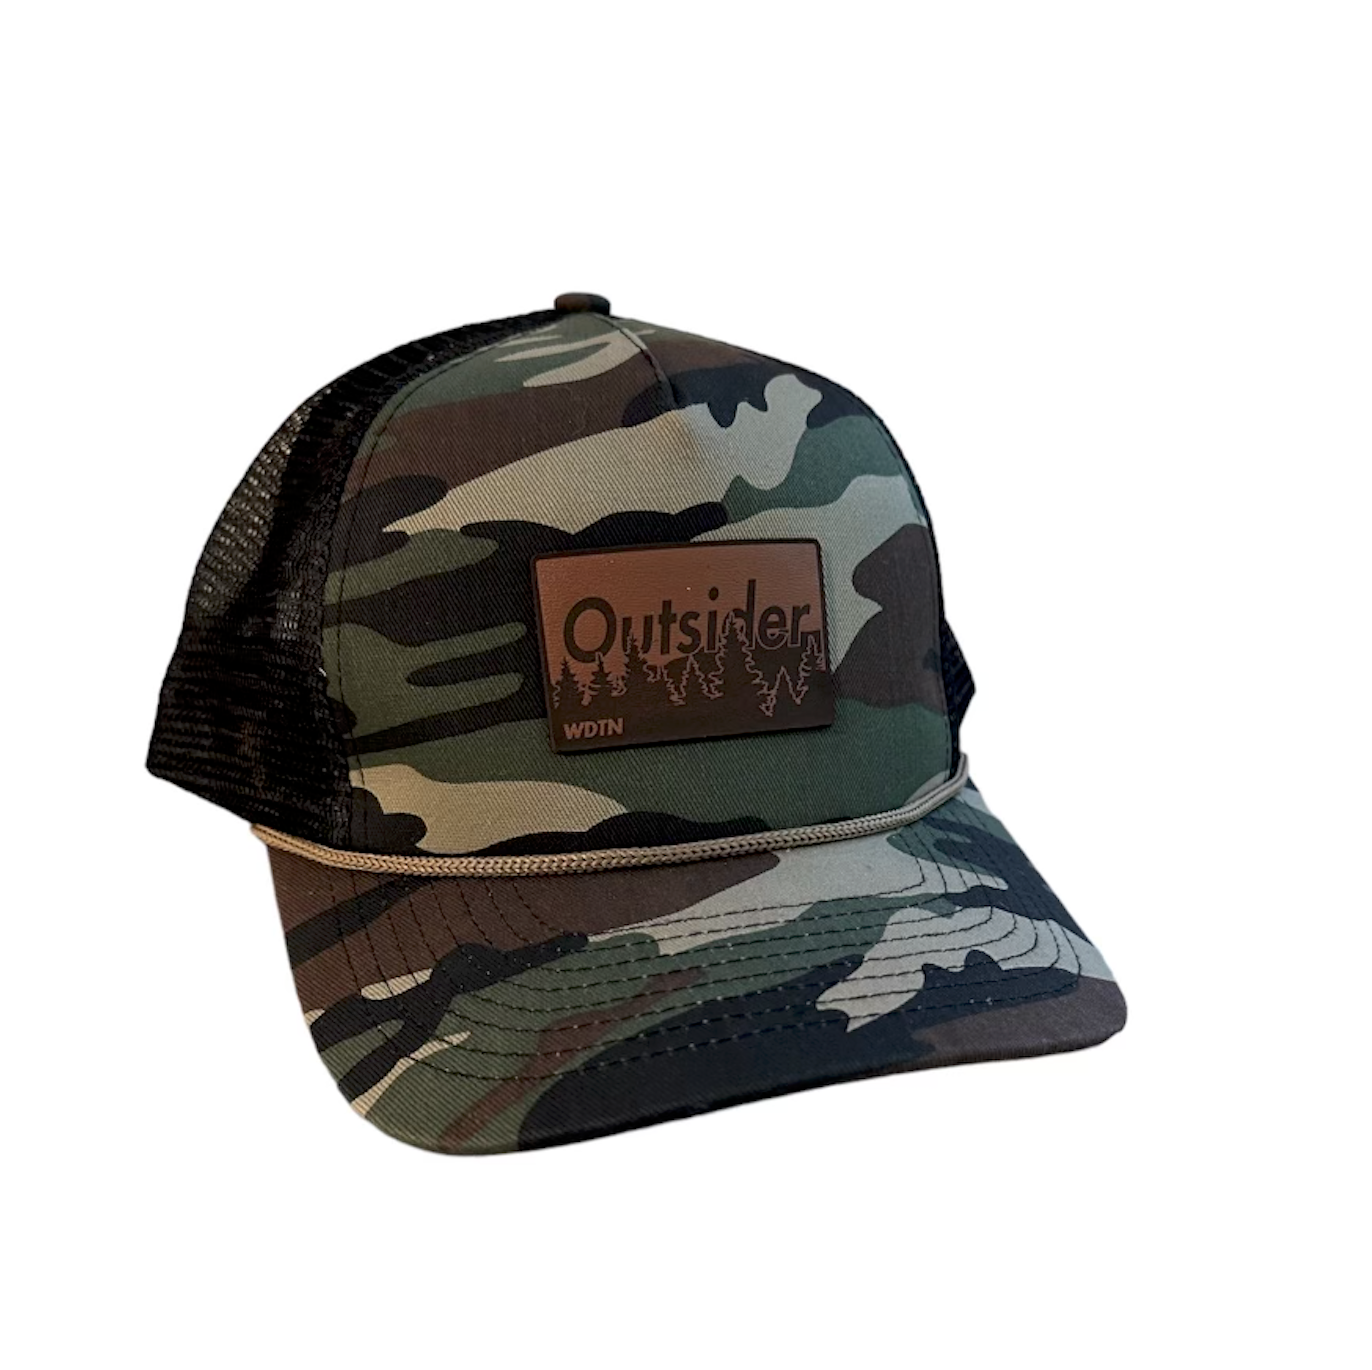 Outsider Leather Patch Snapback Hat - Camo